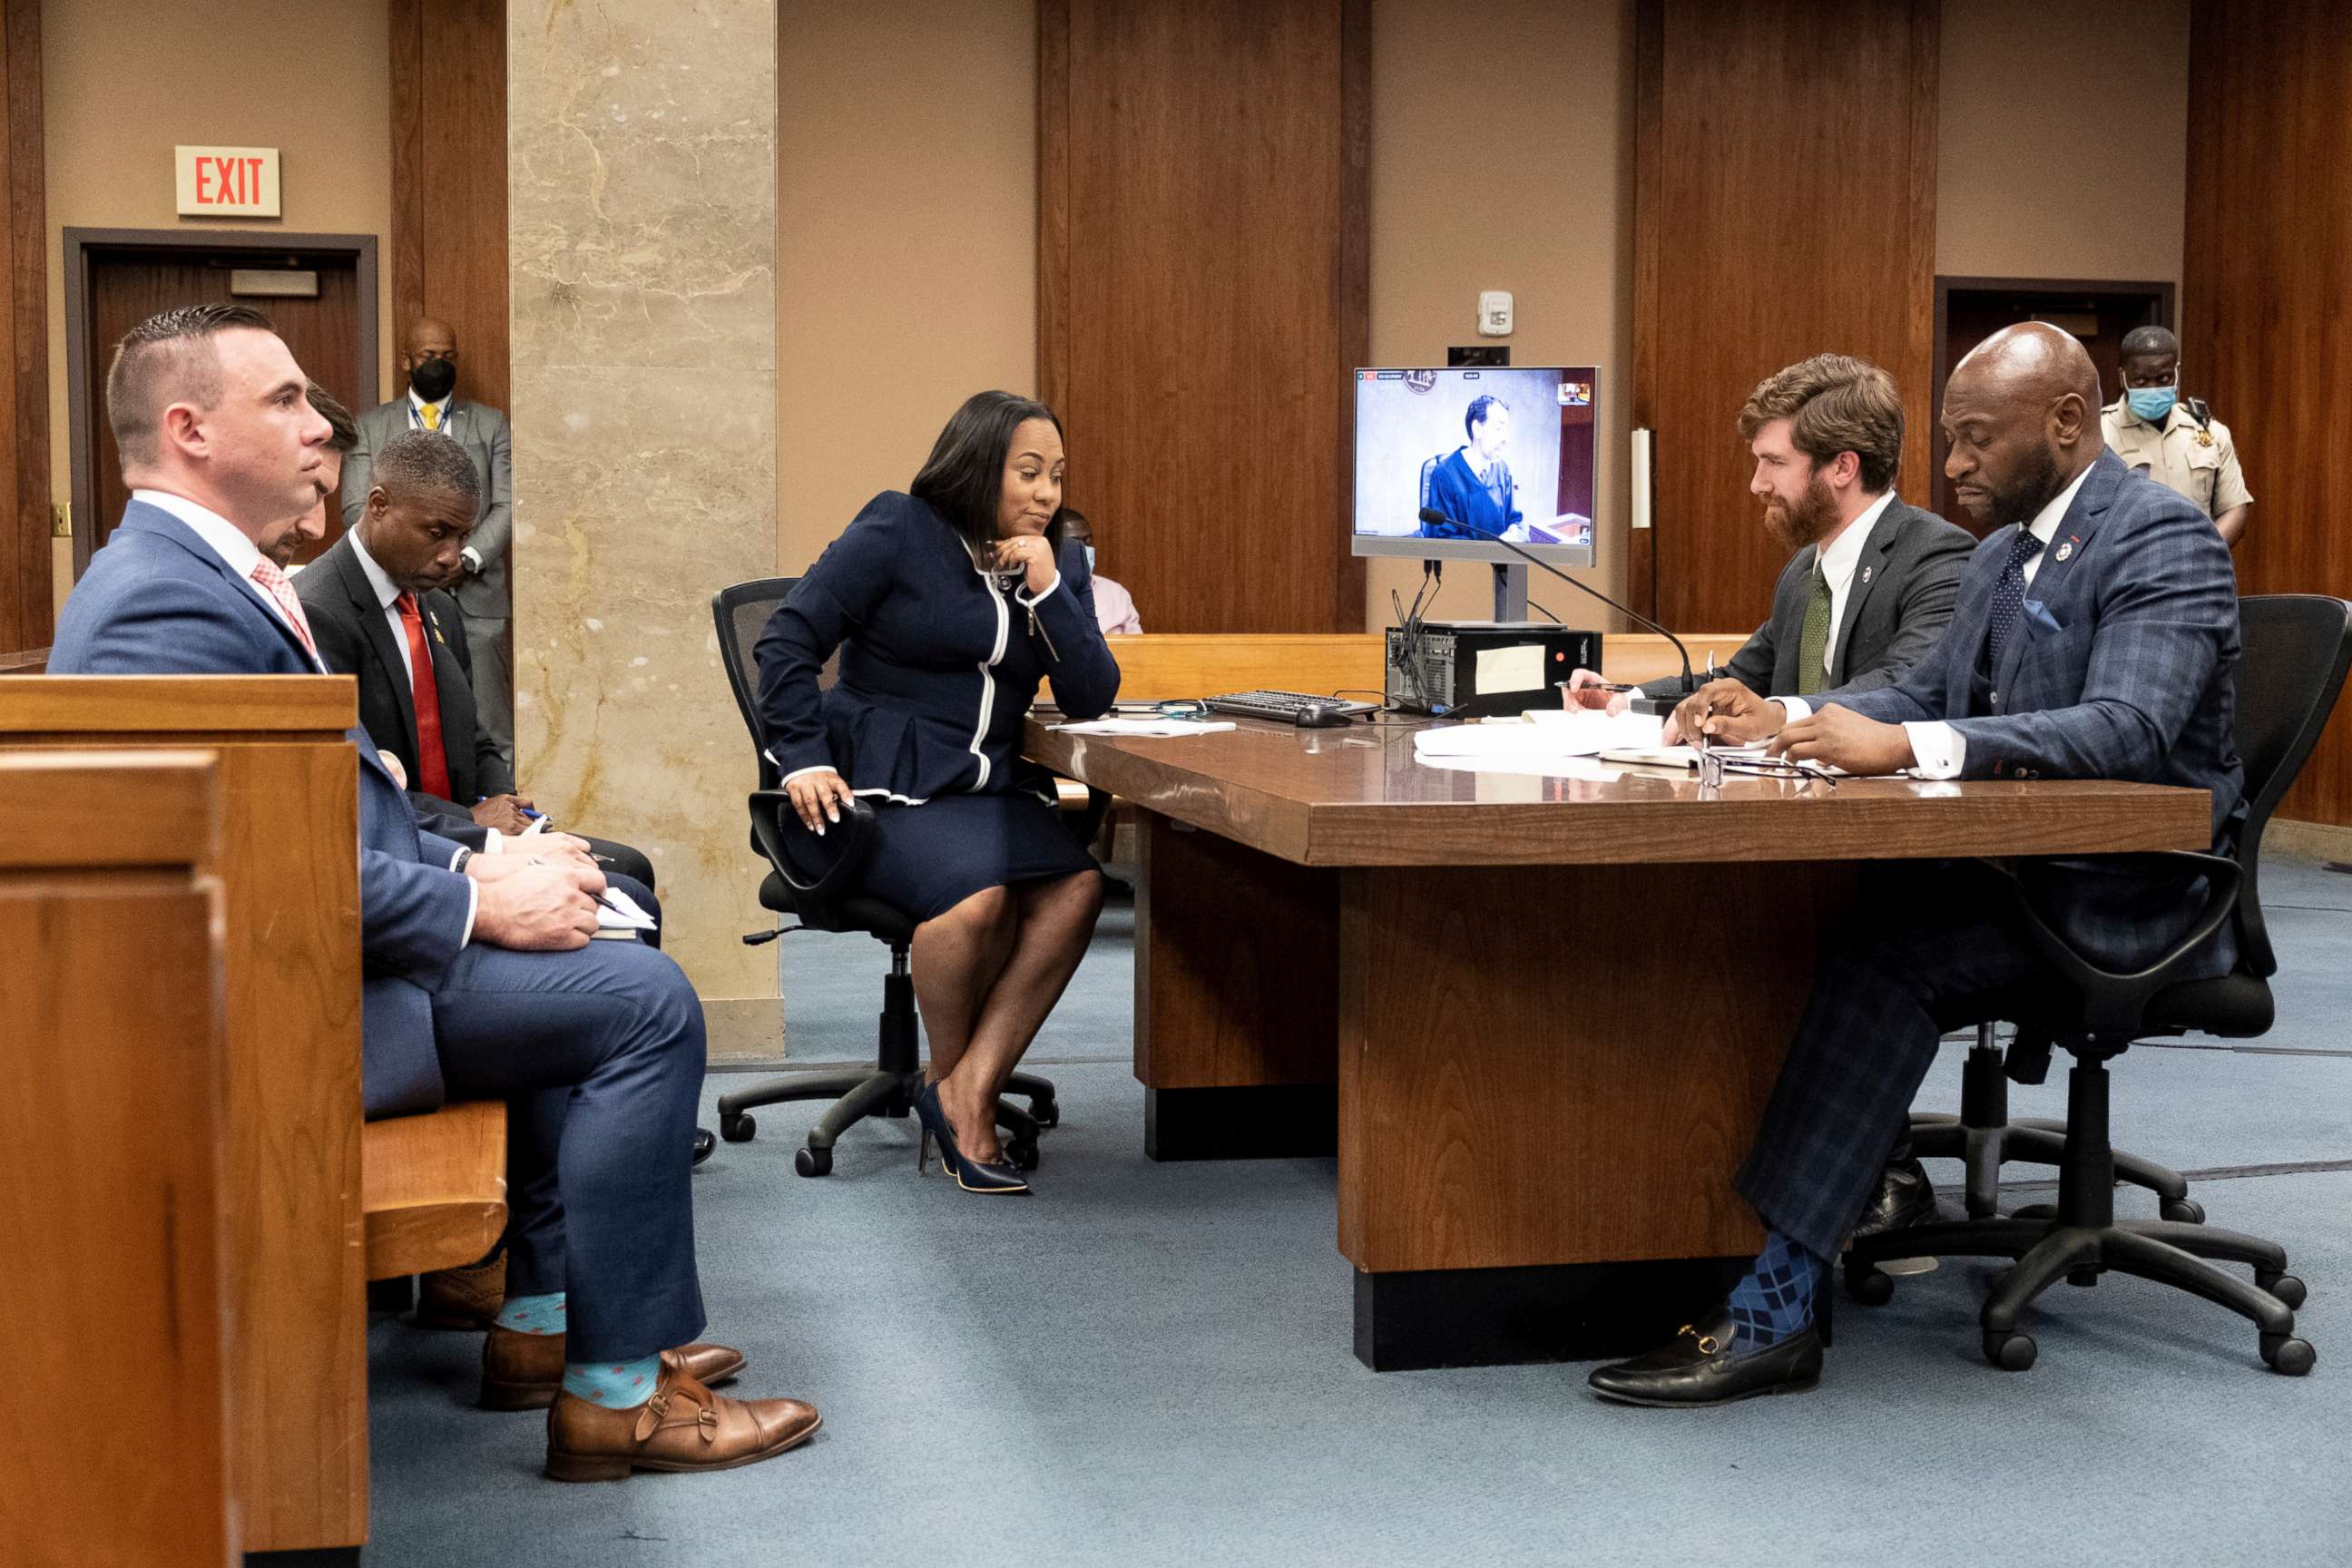 PHOTO: In this May 2, 2022, file photo, Fulton County District Attorney Fani Willis, center, sits with her team during proceedings to seat a special purpose grand jury in Fulton County, Ga.